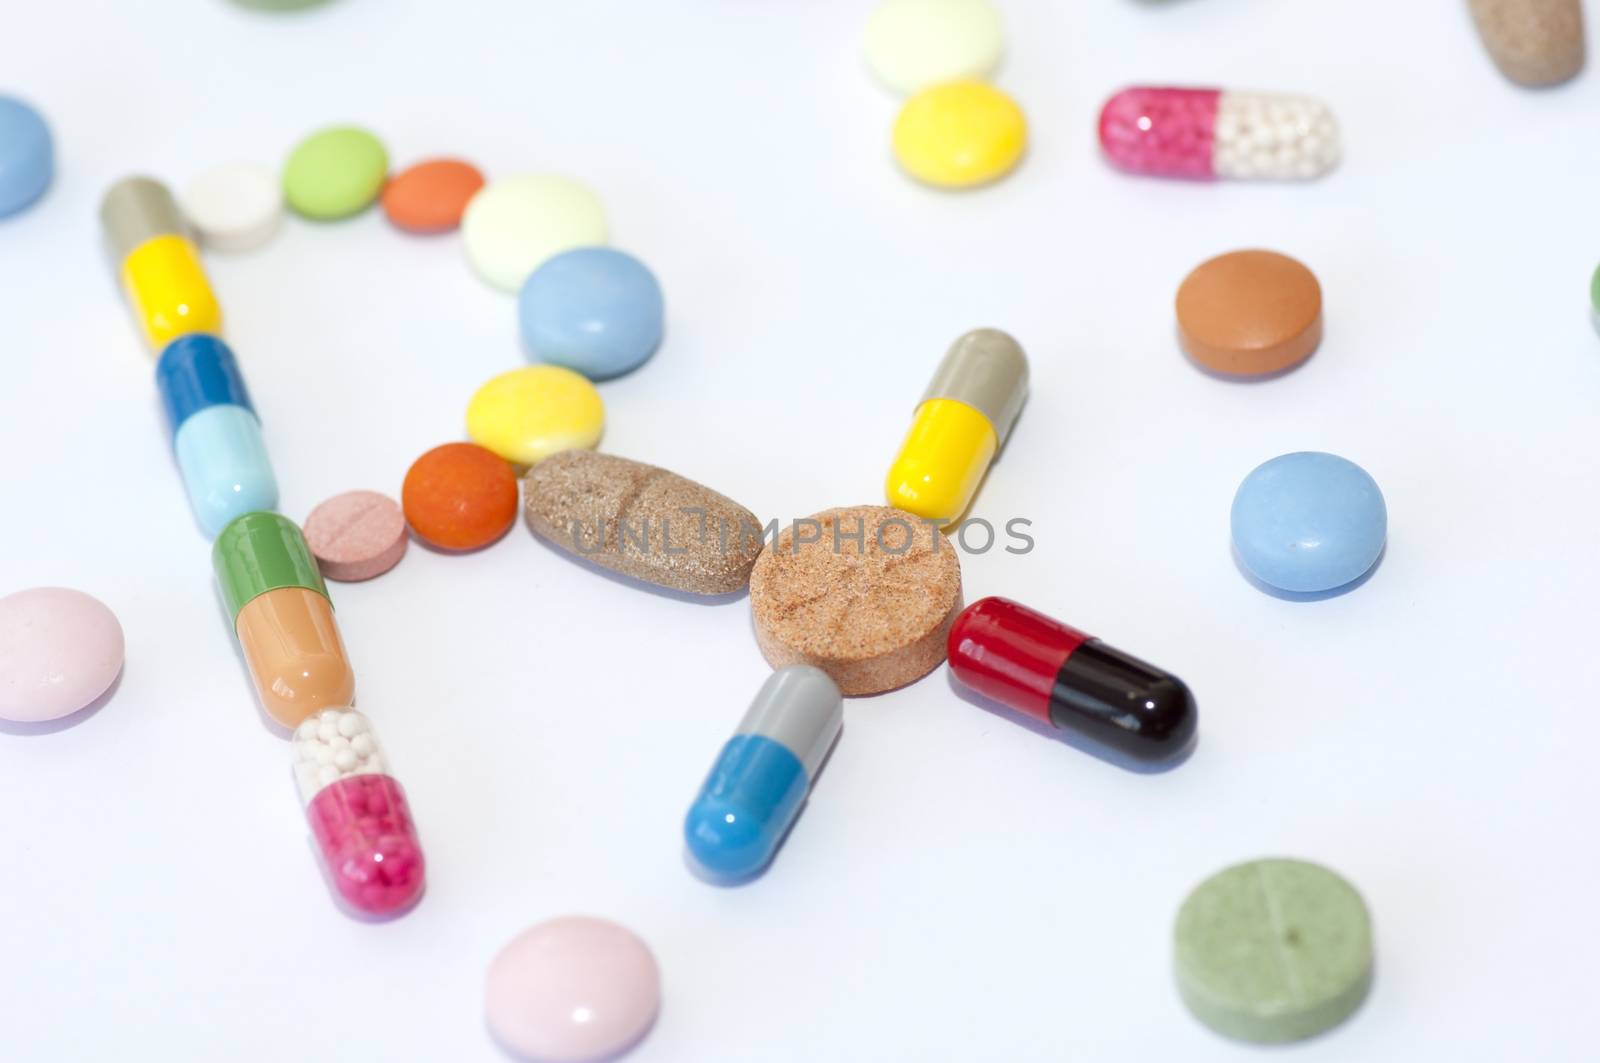 Prescription symbol Rx made of various capsules, pills and tablets